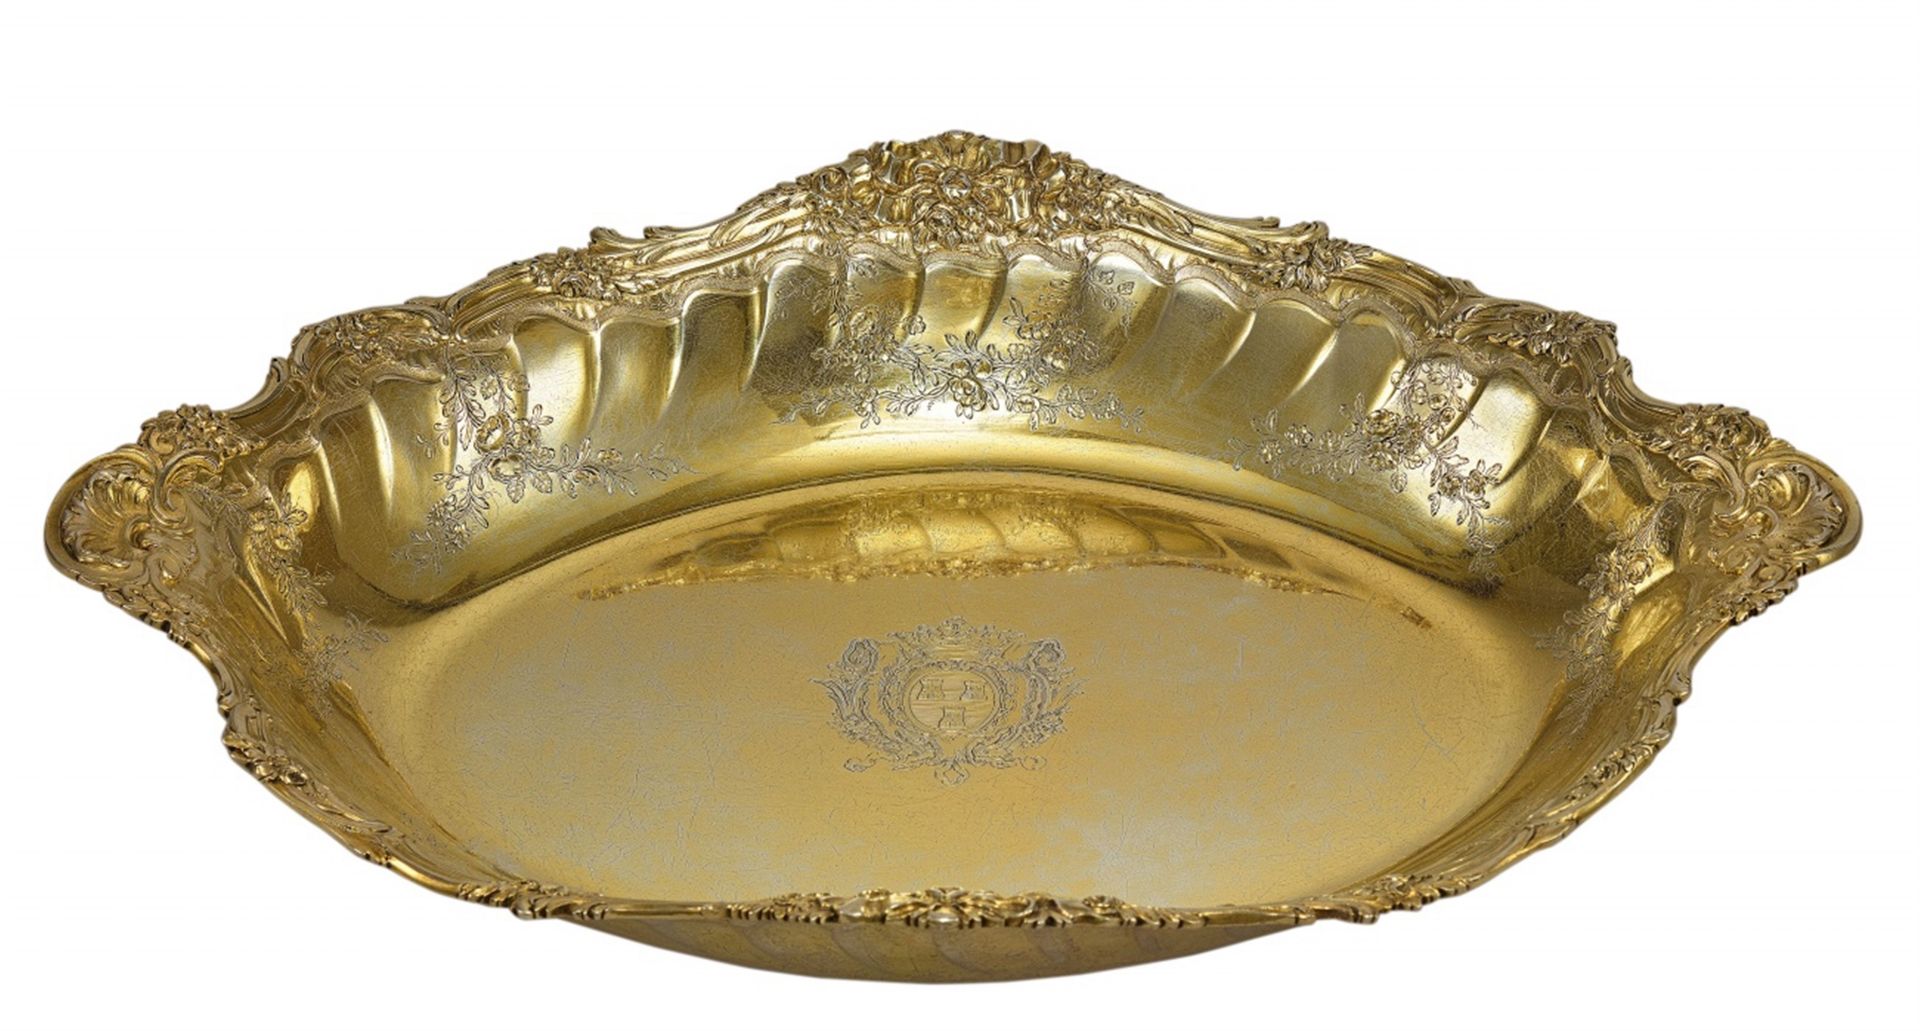 A rare, museum quality piece: Silver gilt wash basin with the coat-of-arms of Madame Pompadour